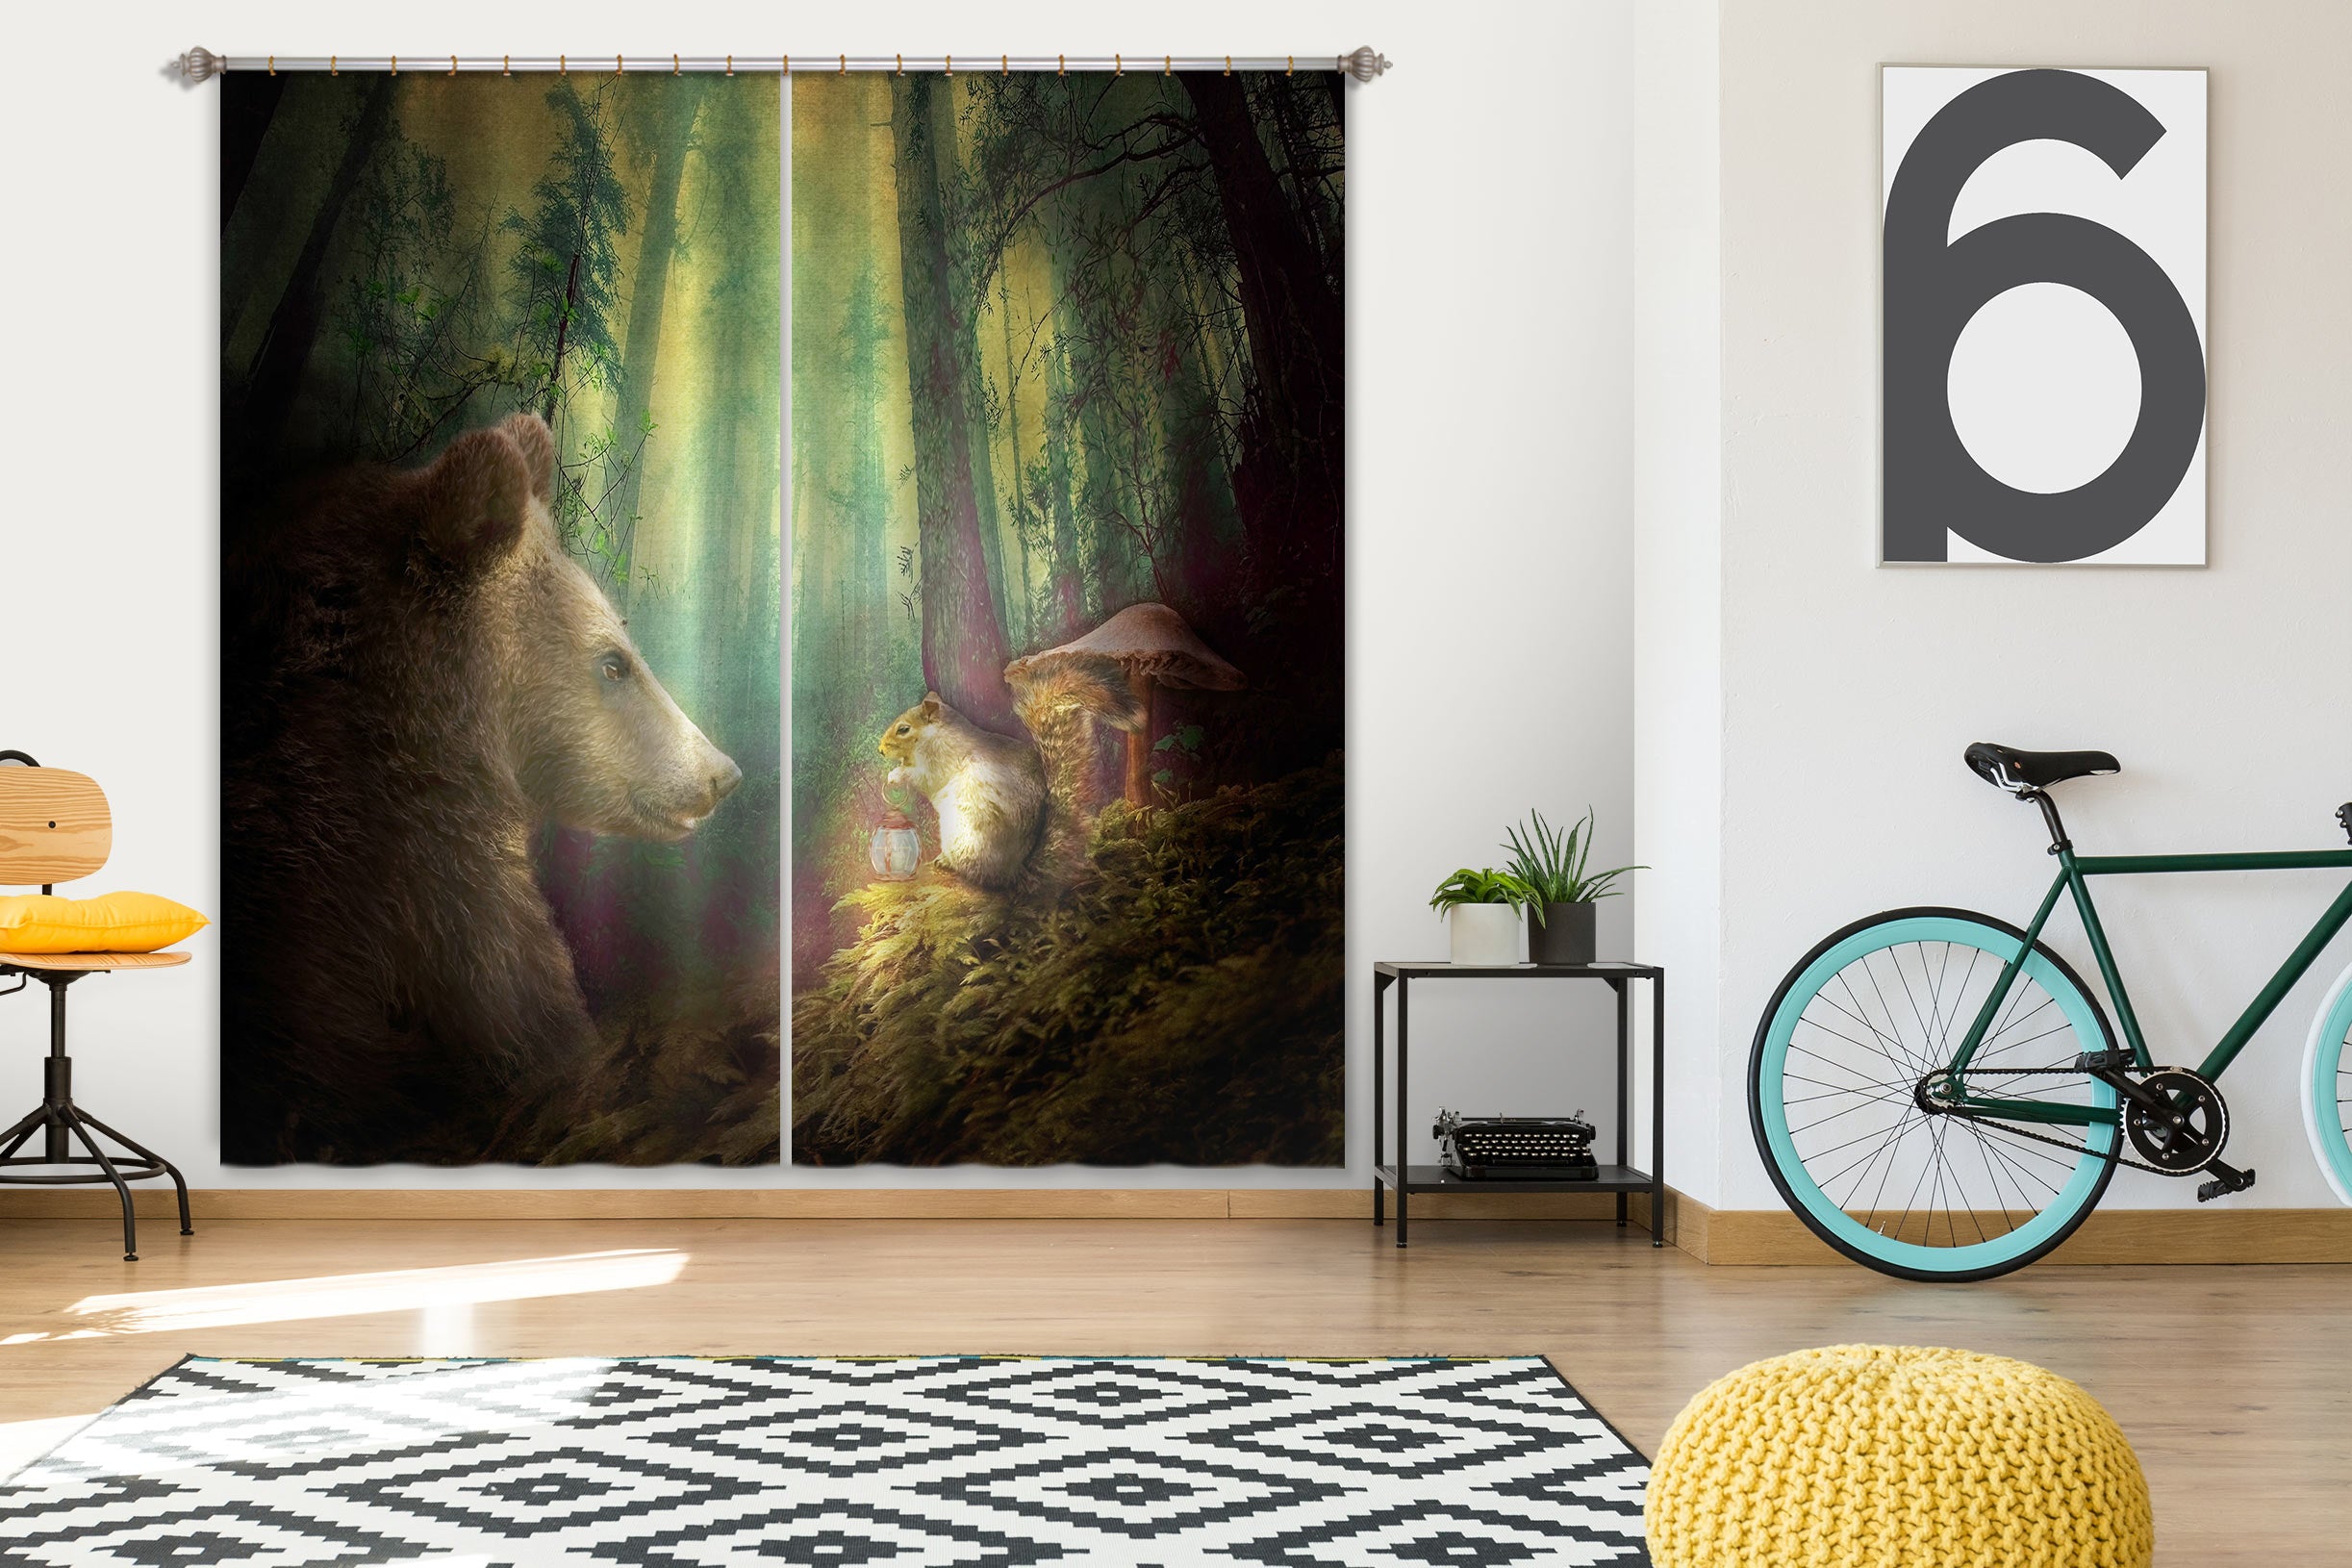 3D Forest Bear Mouse 5363 Beth Sheridan Curtain Curtains Drapes